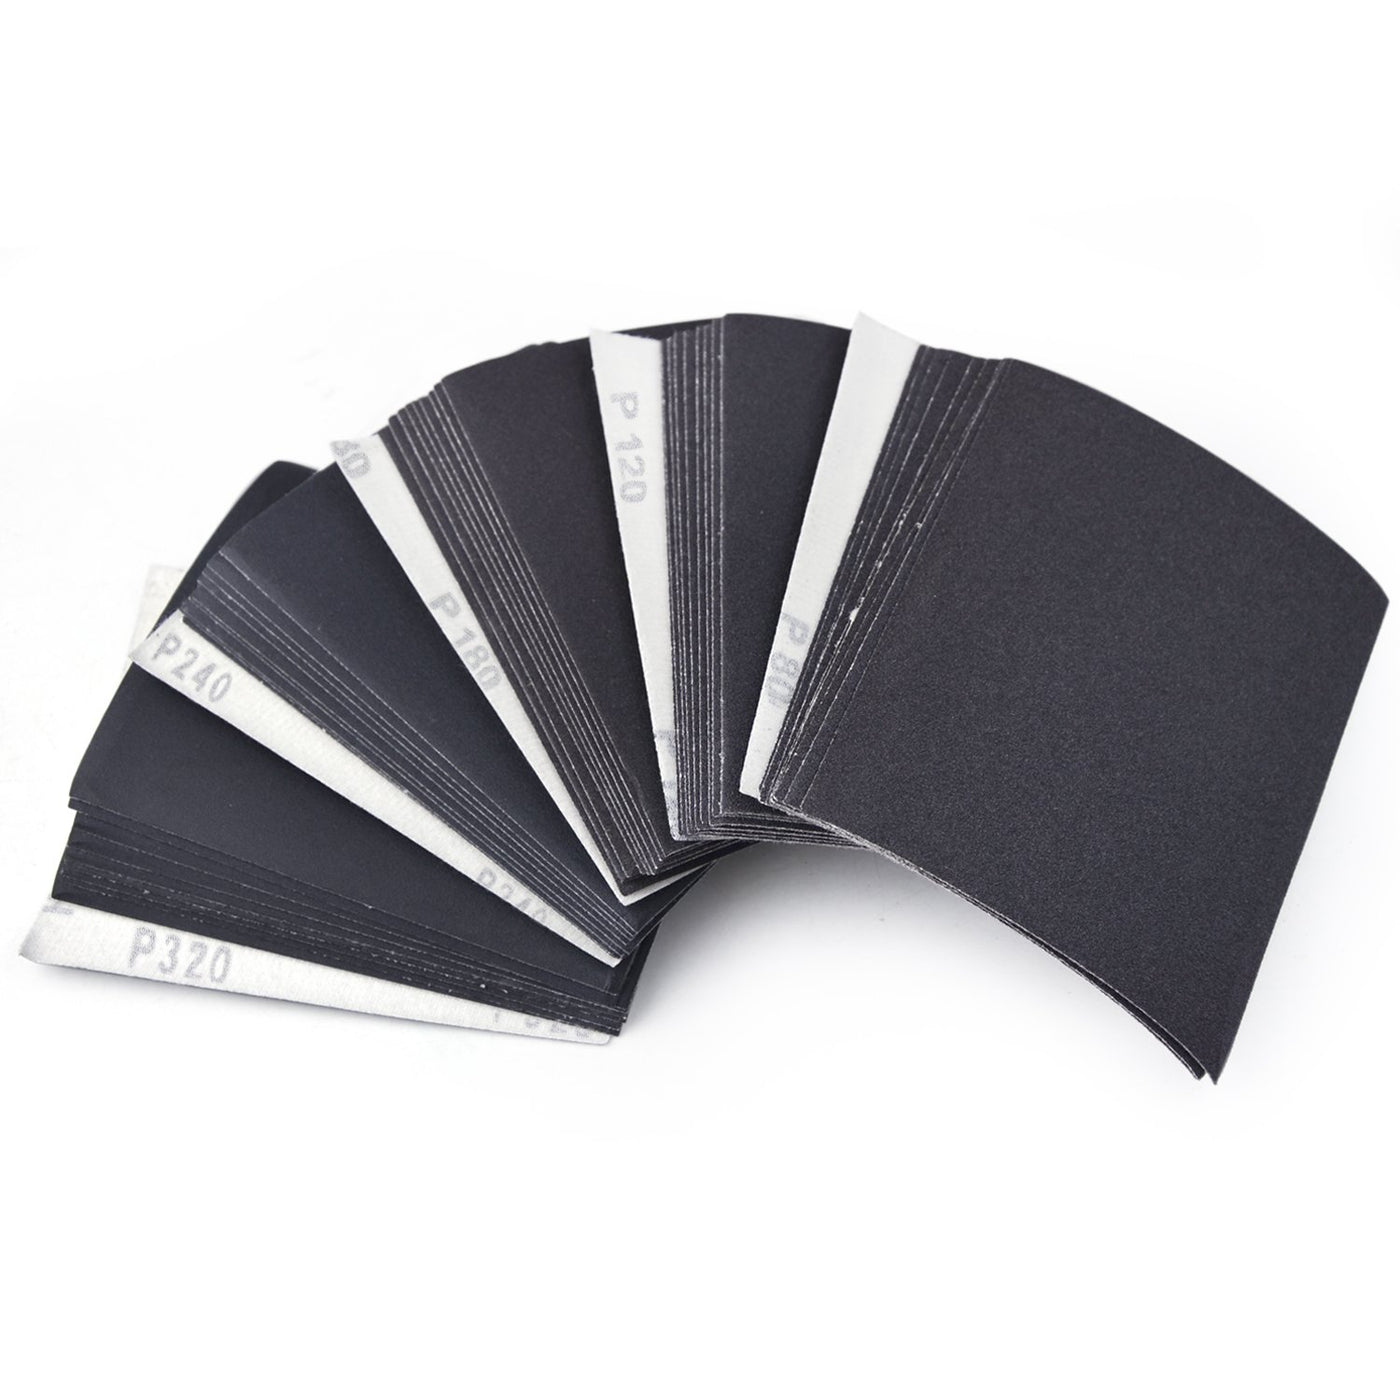 5.5 x 4.5" (140 x 115mm) Hook & Loop or Clip on Sander Pads，Silicon Carbide Wet/Dry Sanding Sheet